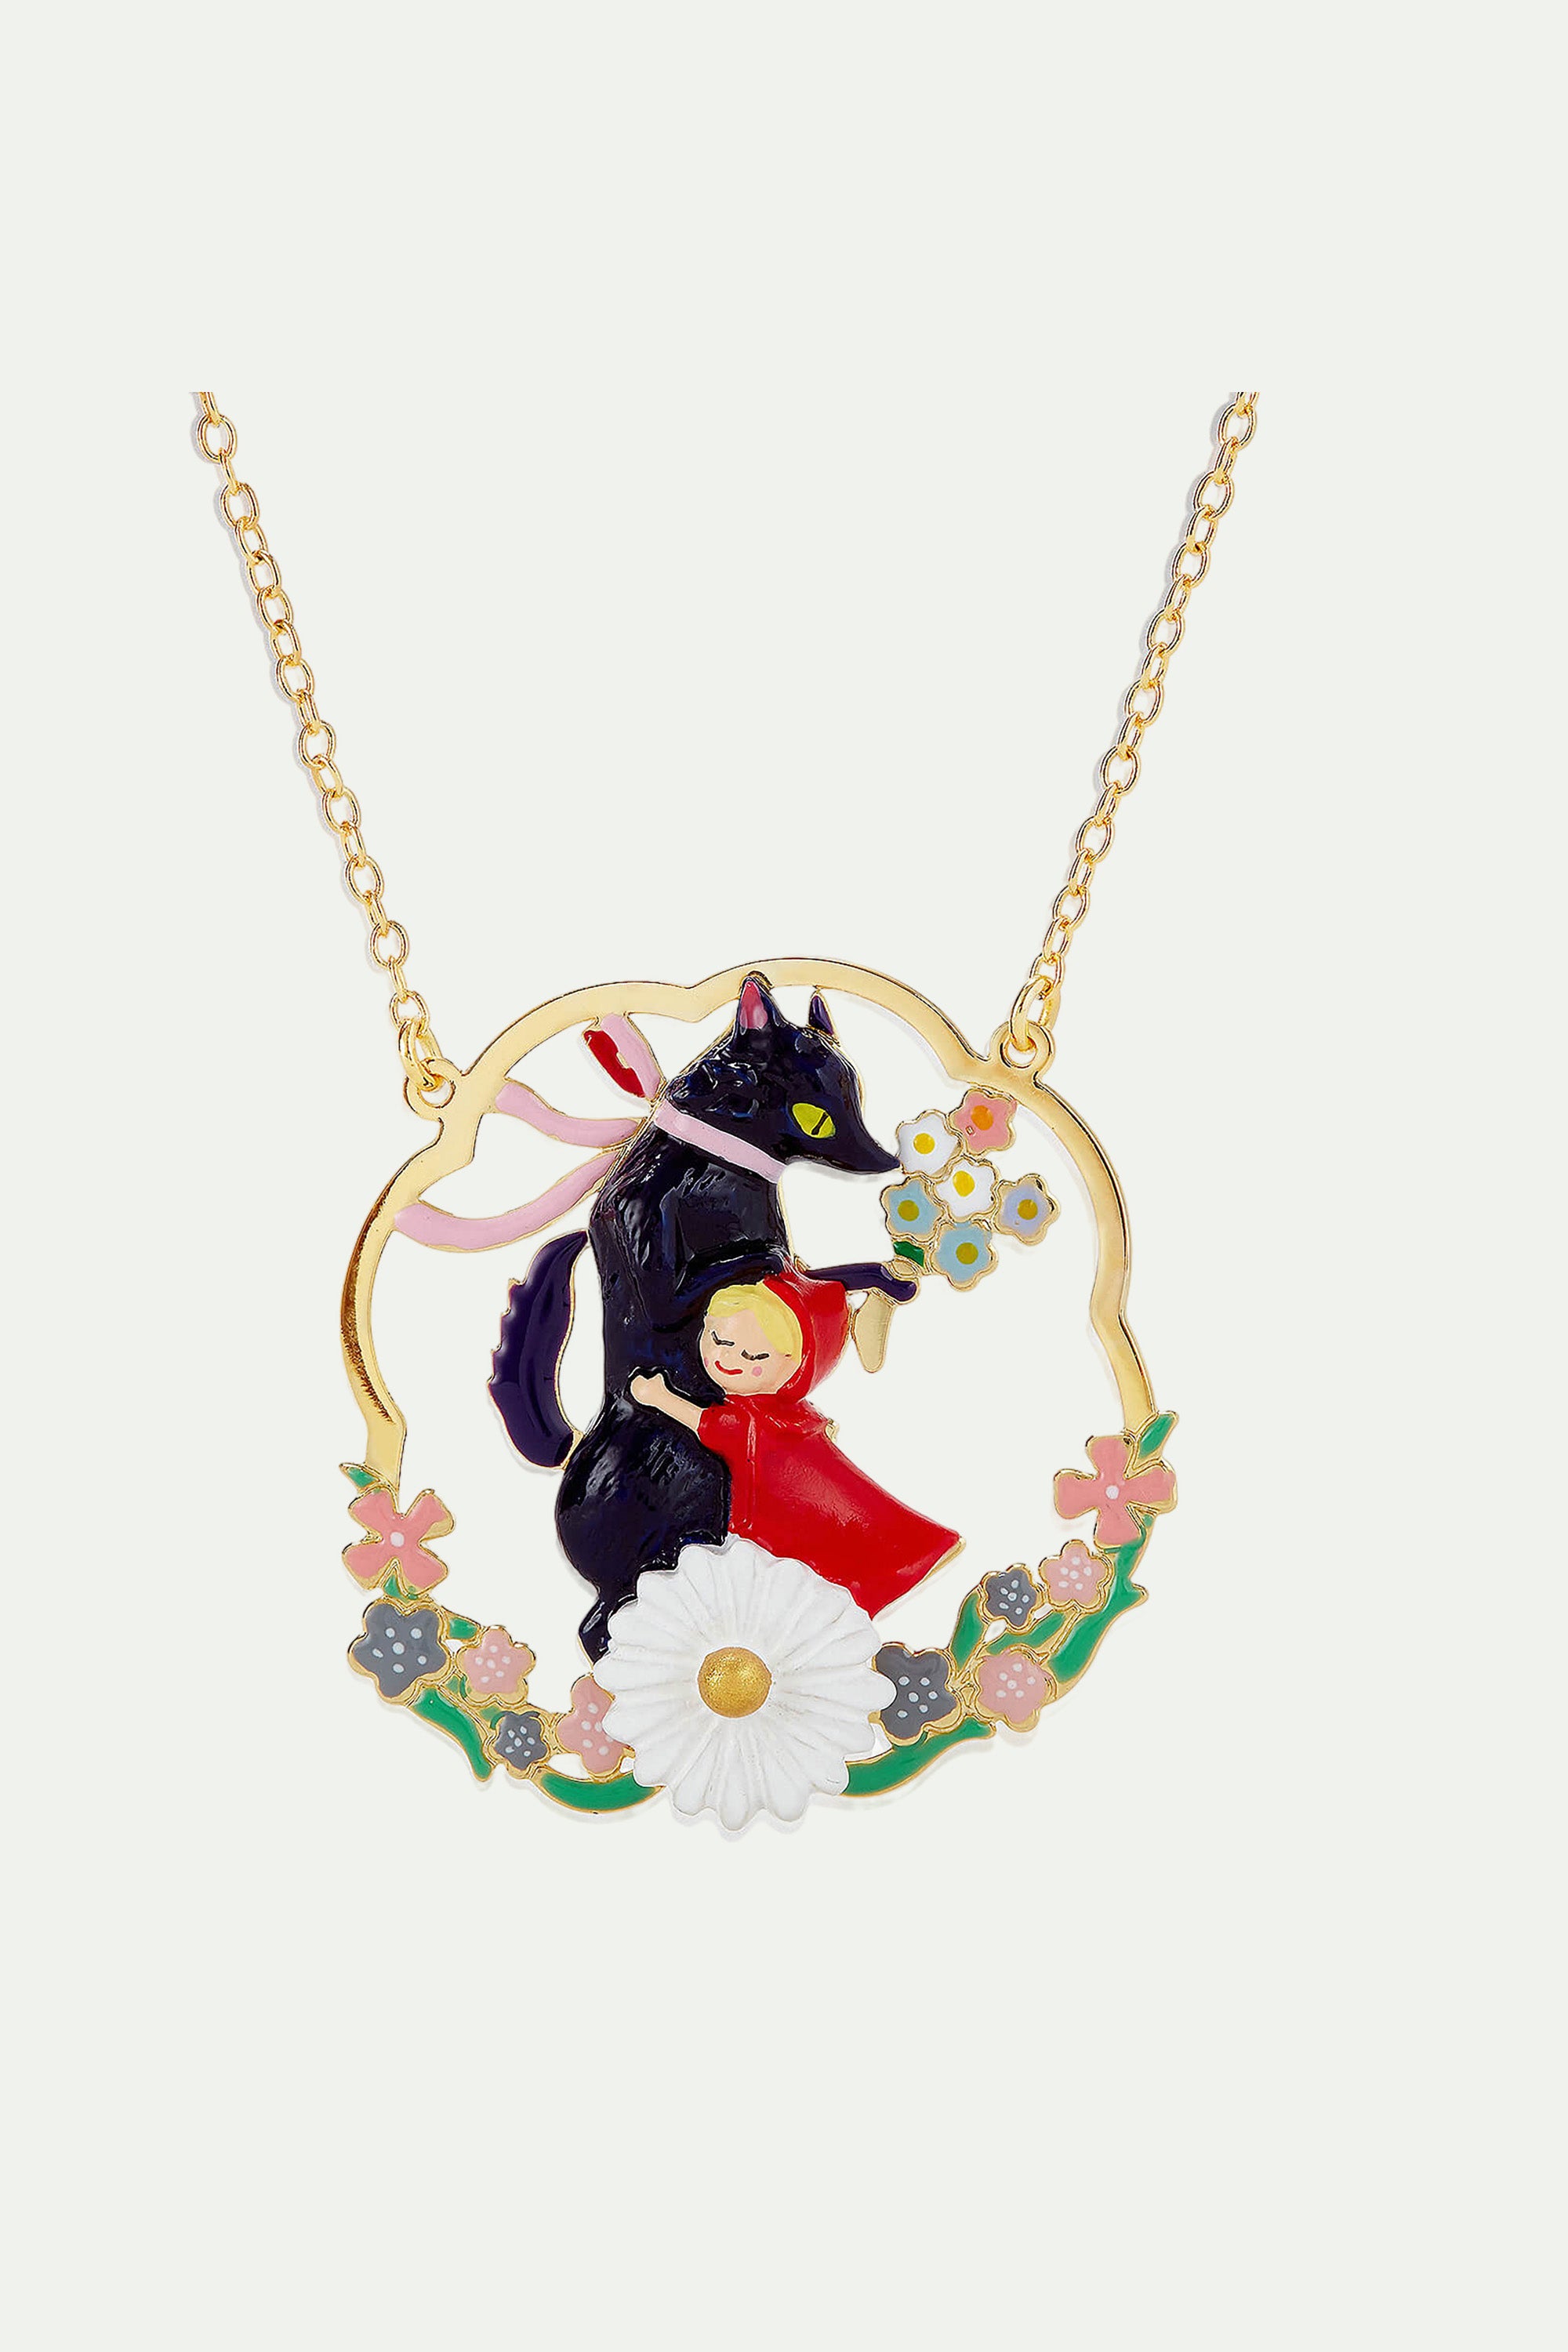 Big Bad Wolf and Little Red Riding Hood statement necklace